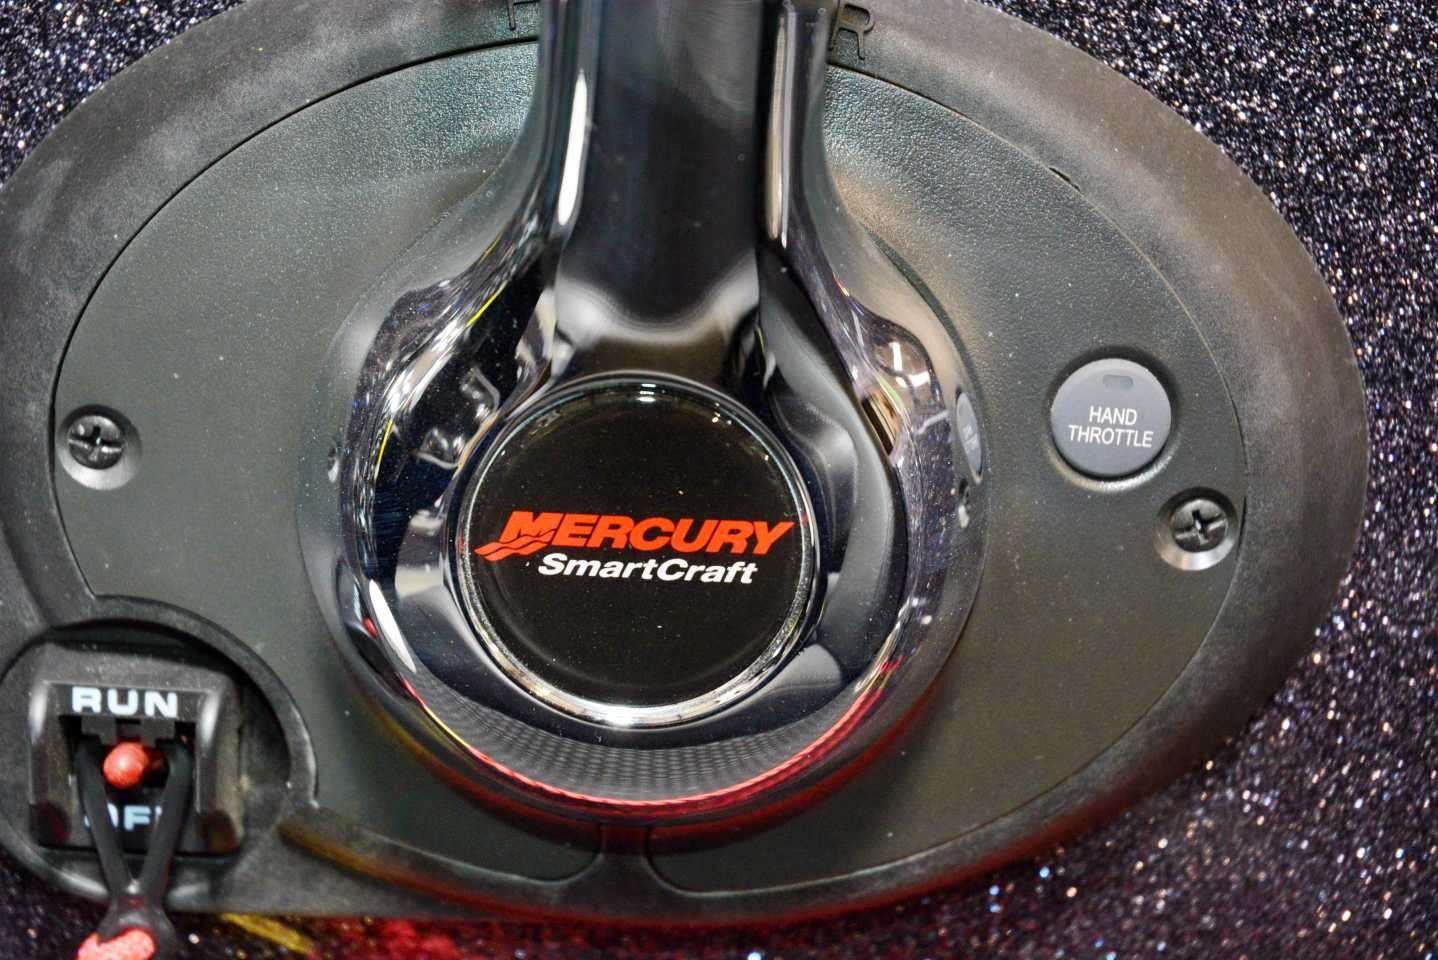 The motor is rigged with Mercuryâs exclusive Digital Throttle & Shift (DTS) technology, featuring electronic throttle control. Sensors and wires transmit commands through the engineâs computer for fast and precise throttle control. 
